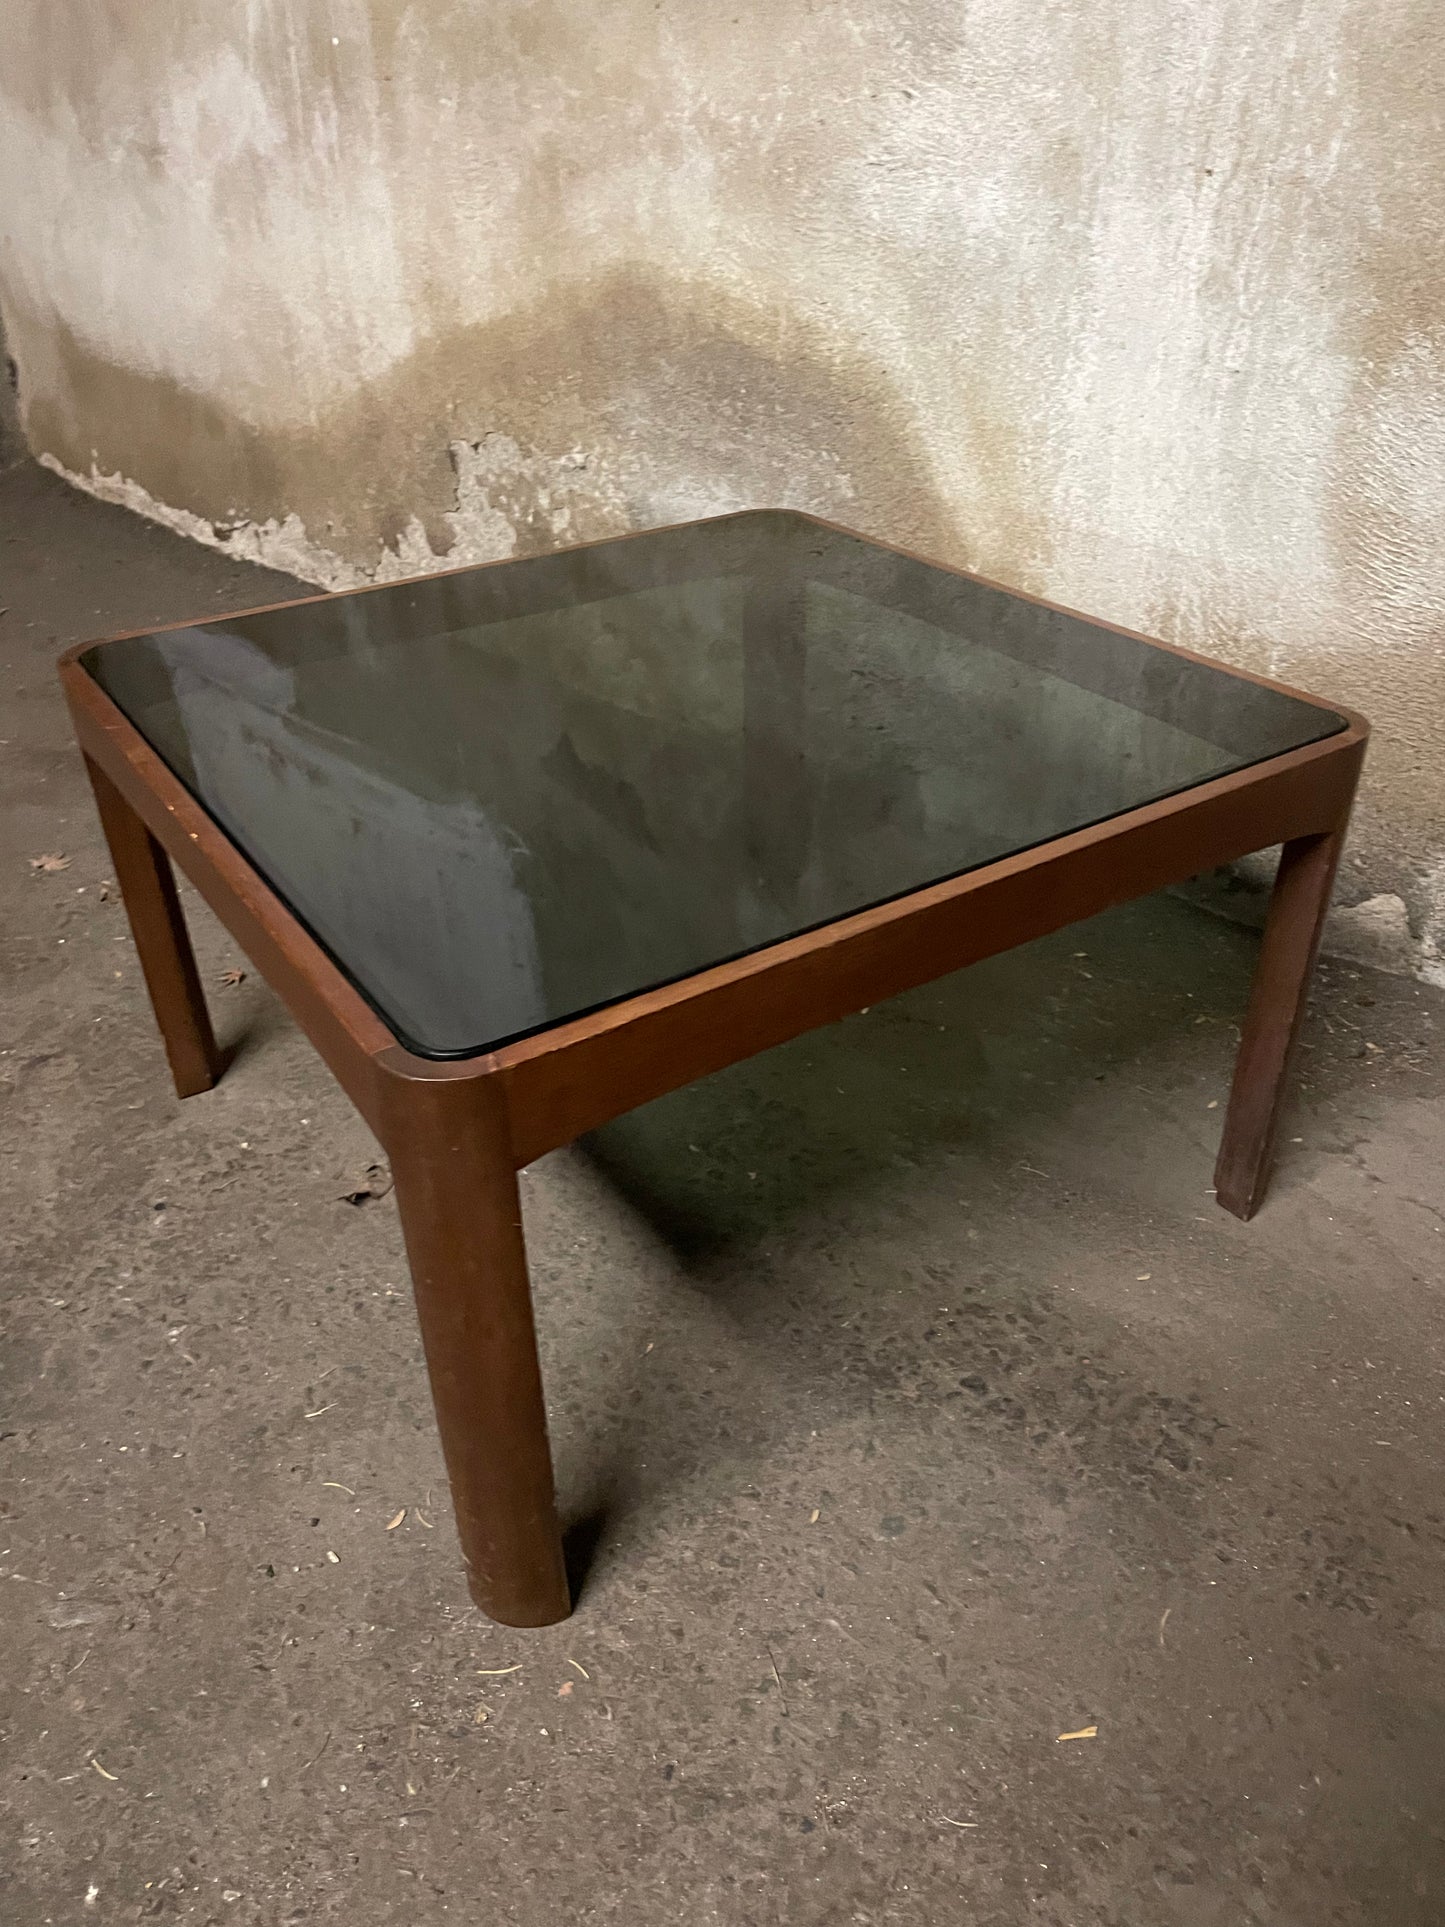 Trio of Poltronova coffee tables in wood and glass